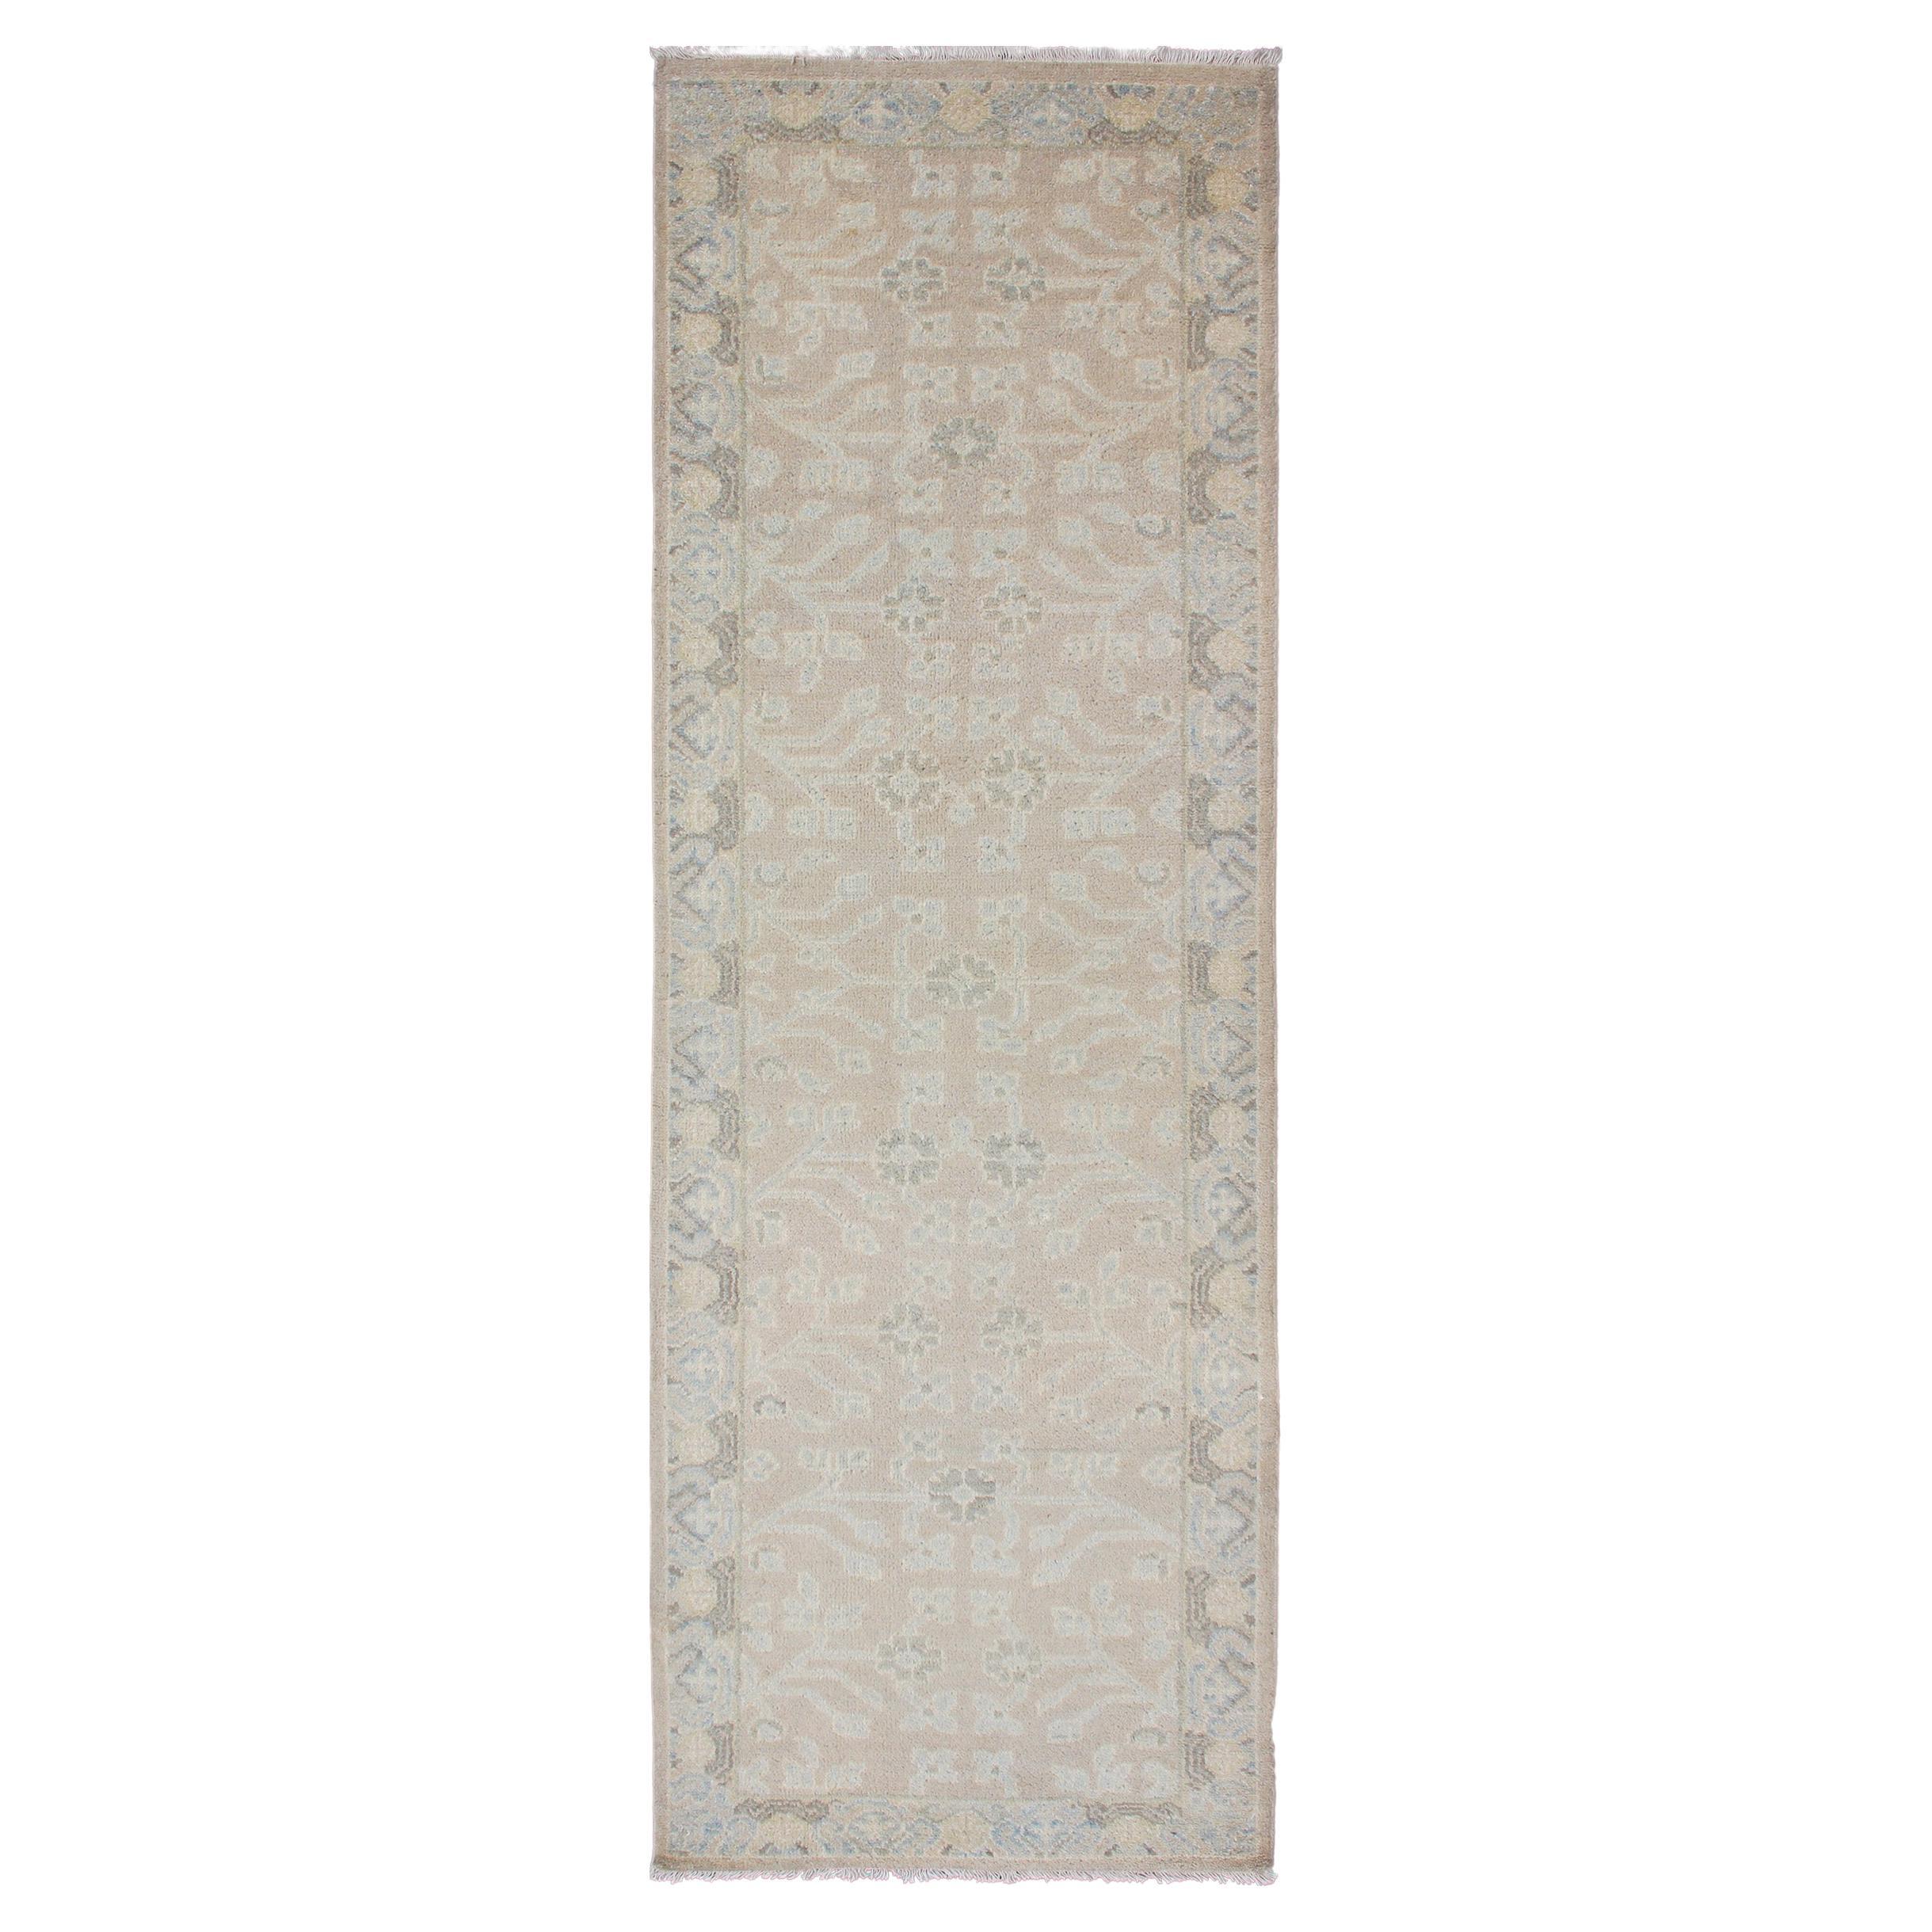 Keivan Woven Arts Khotan Runner in Wool with All-Over Sub-Geometric Design For Sale